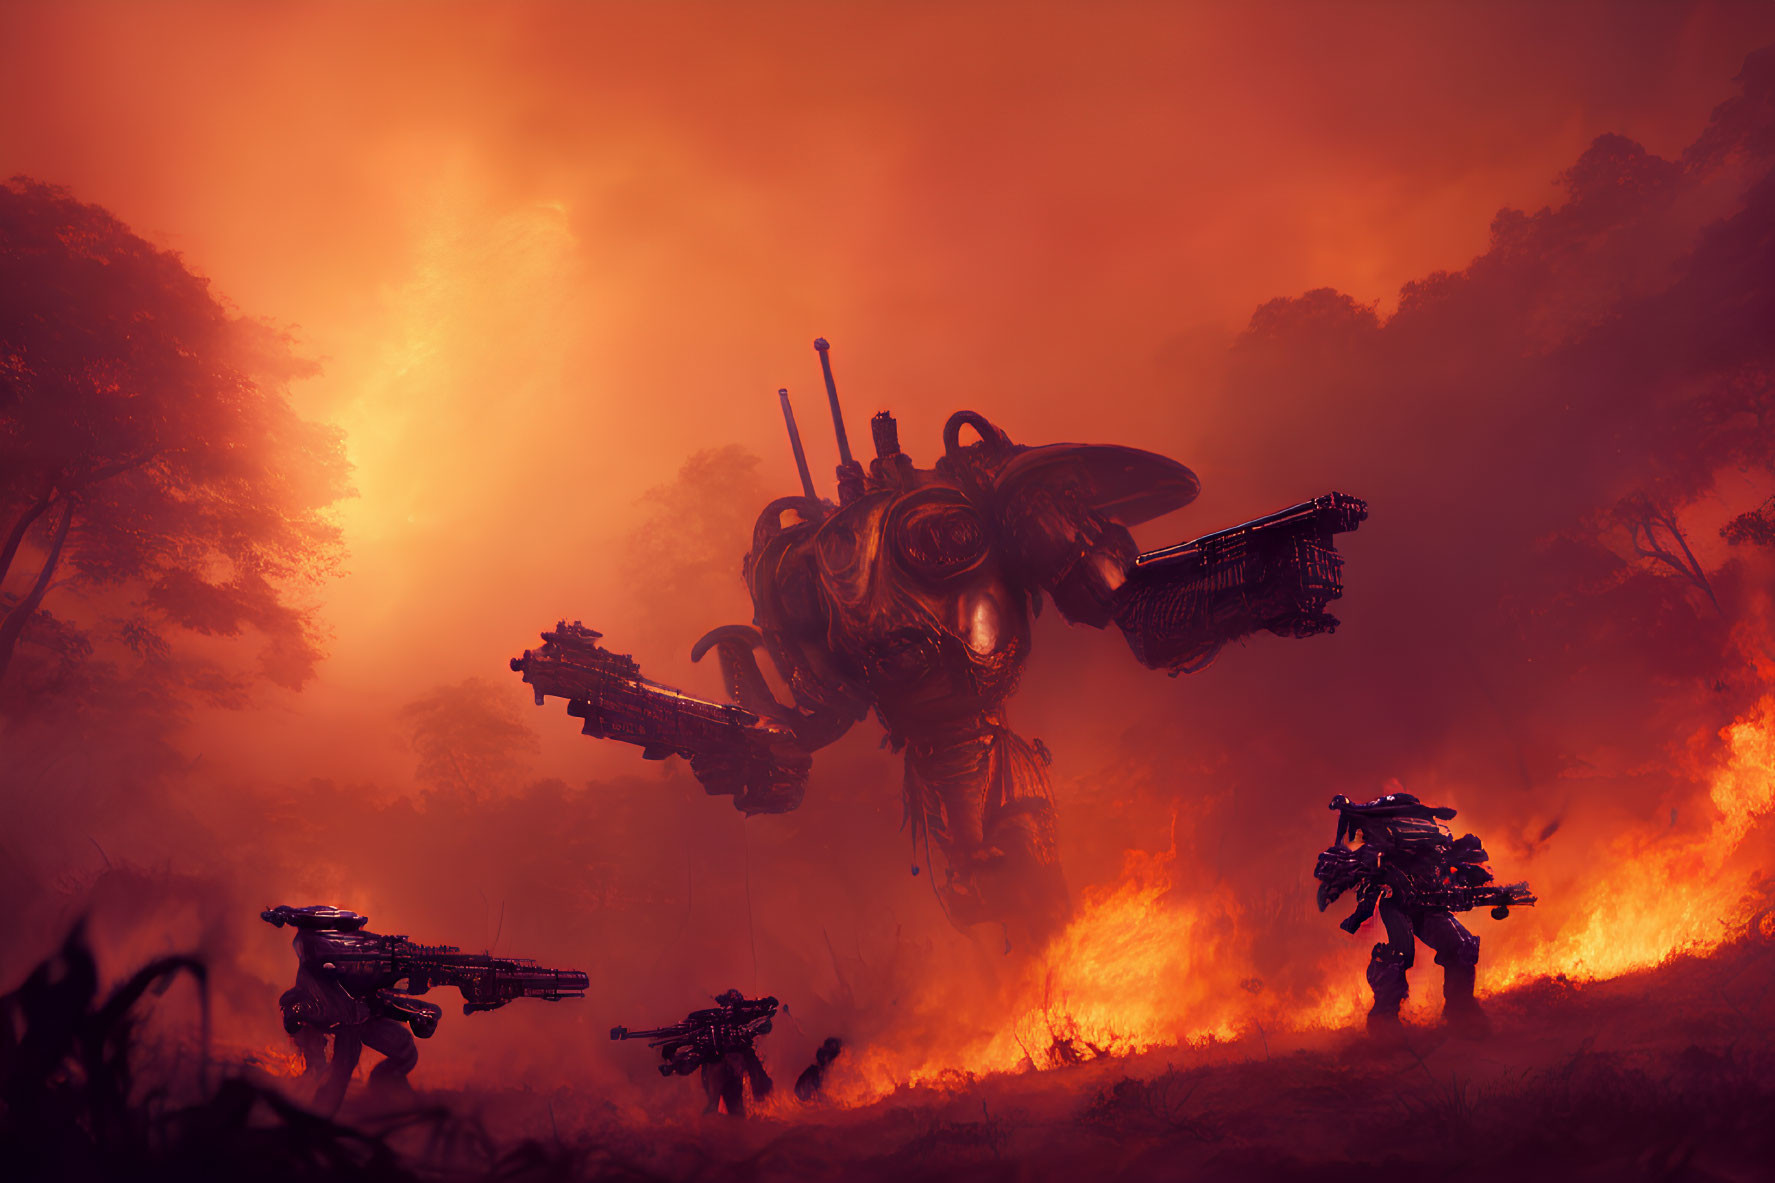 Soldiers and robotic creature in fiery futuristic battle landscape